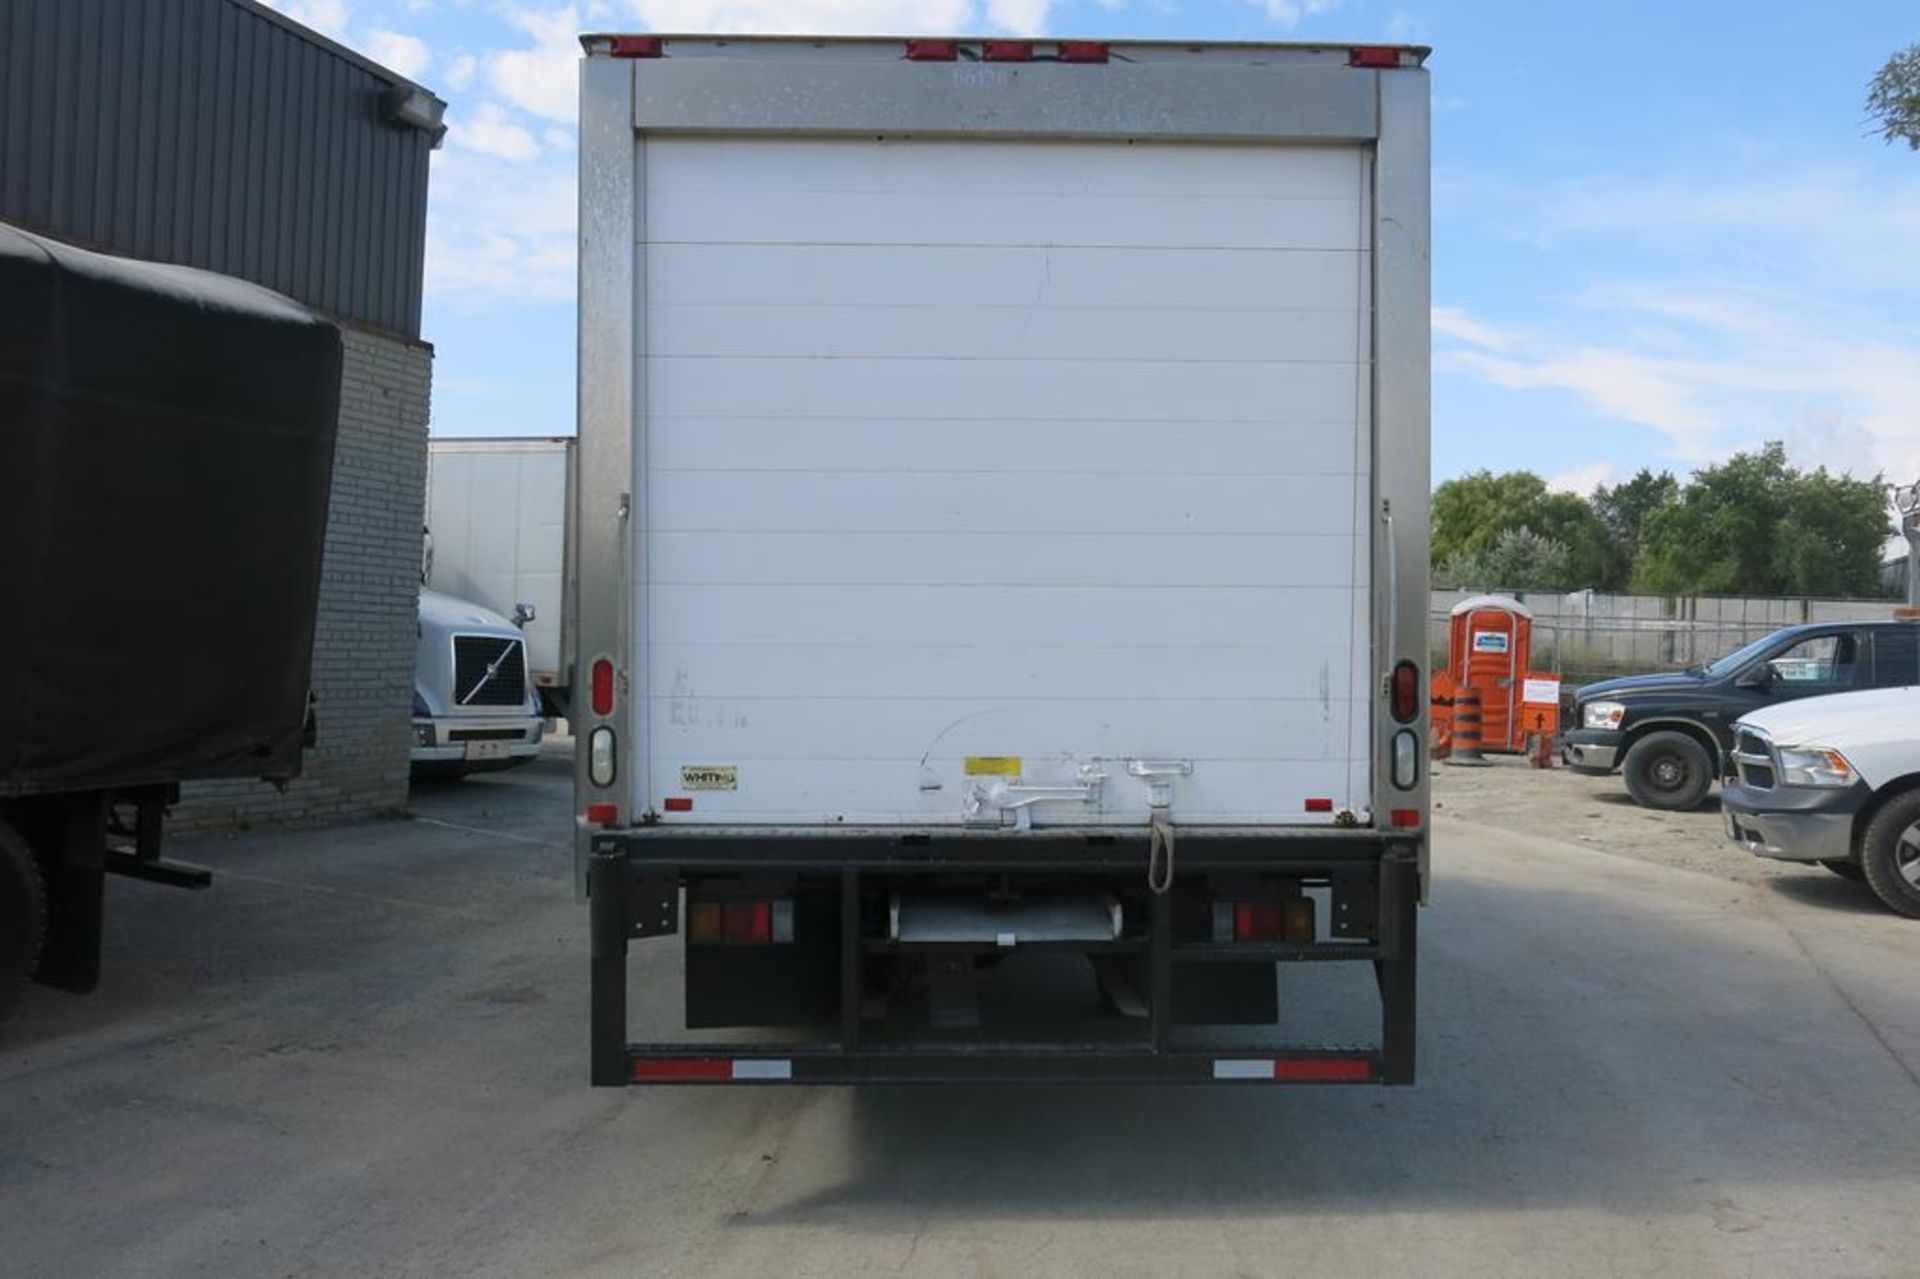 2013, HINO, 195, REEFER TRUCK, MULTIVANS, 18', INSULATED BOX, THERMOKING, T800 WHISPER, REEFER, - Image 6 of 32